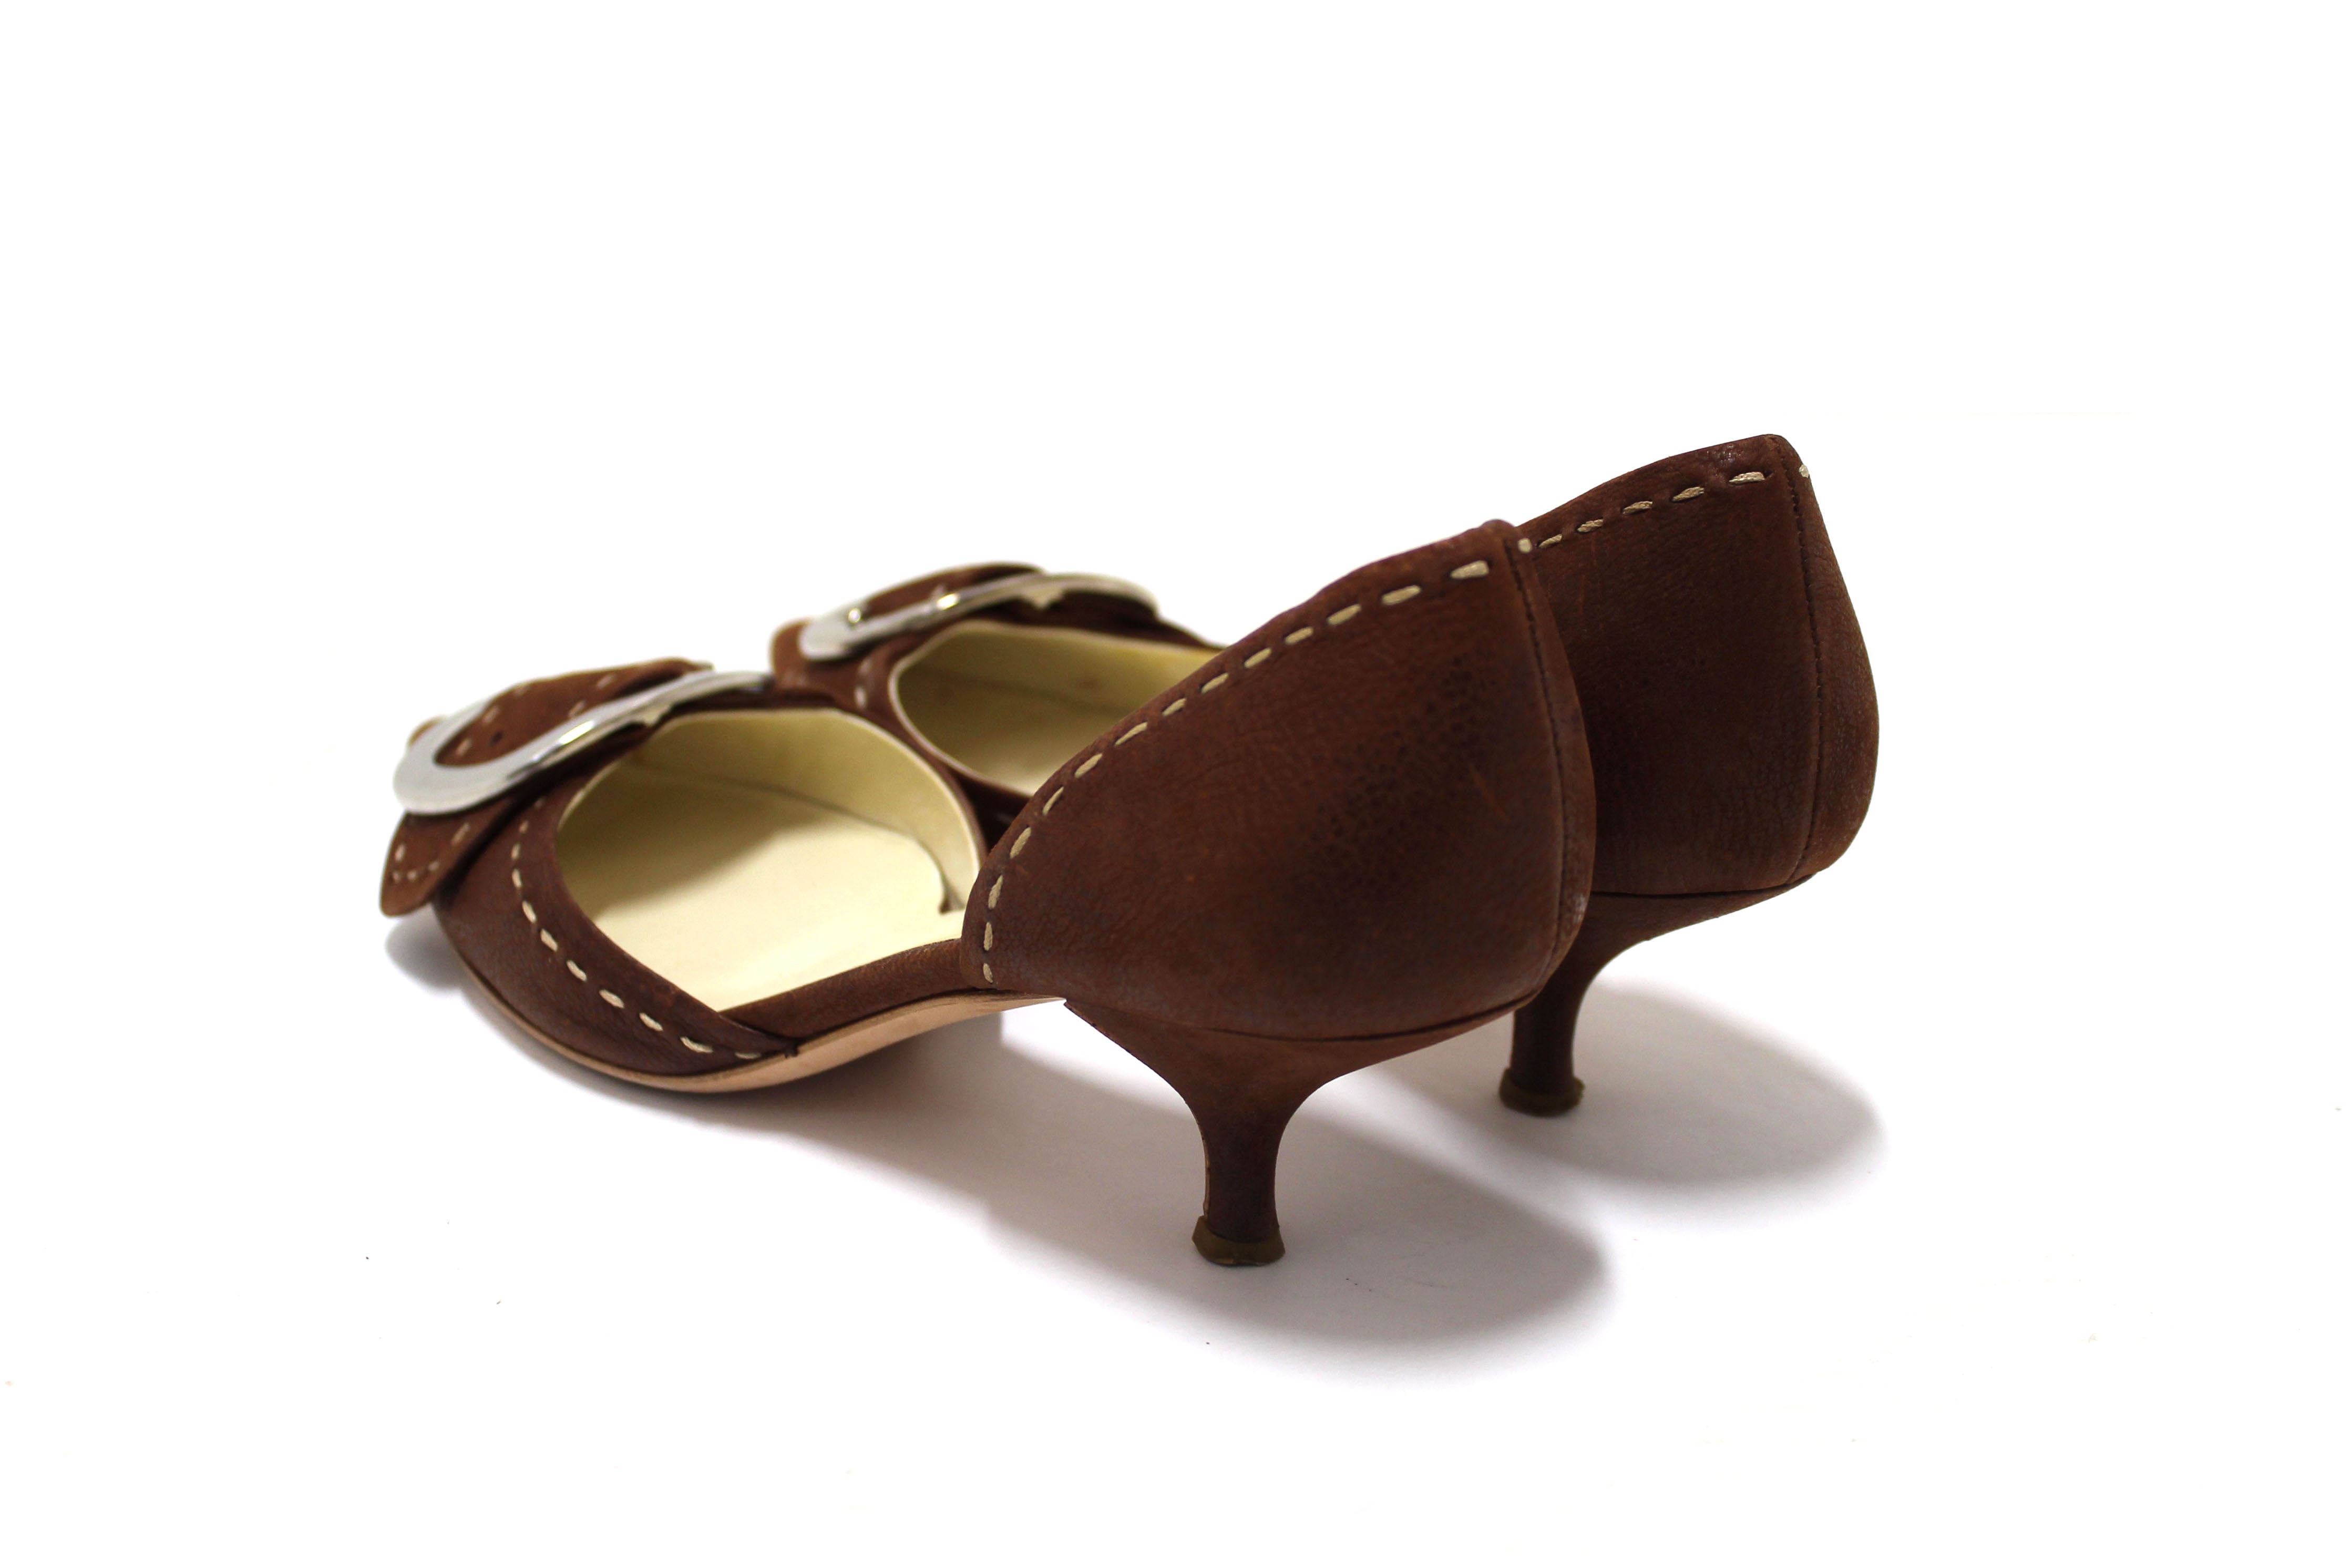 Brown pumps with a low heel handmade of natural grain leather - BRAVOMODA